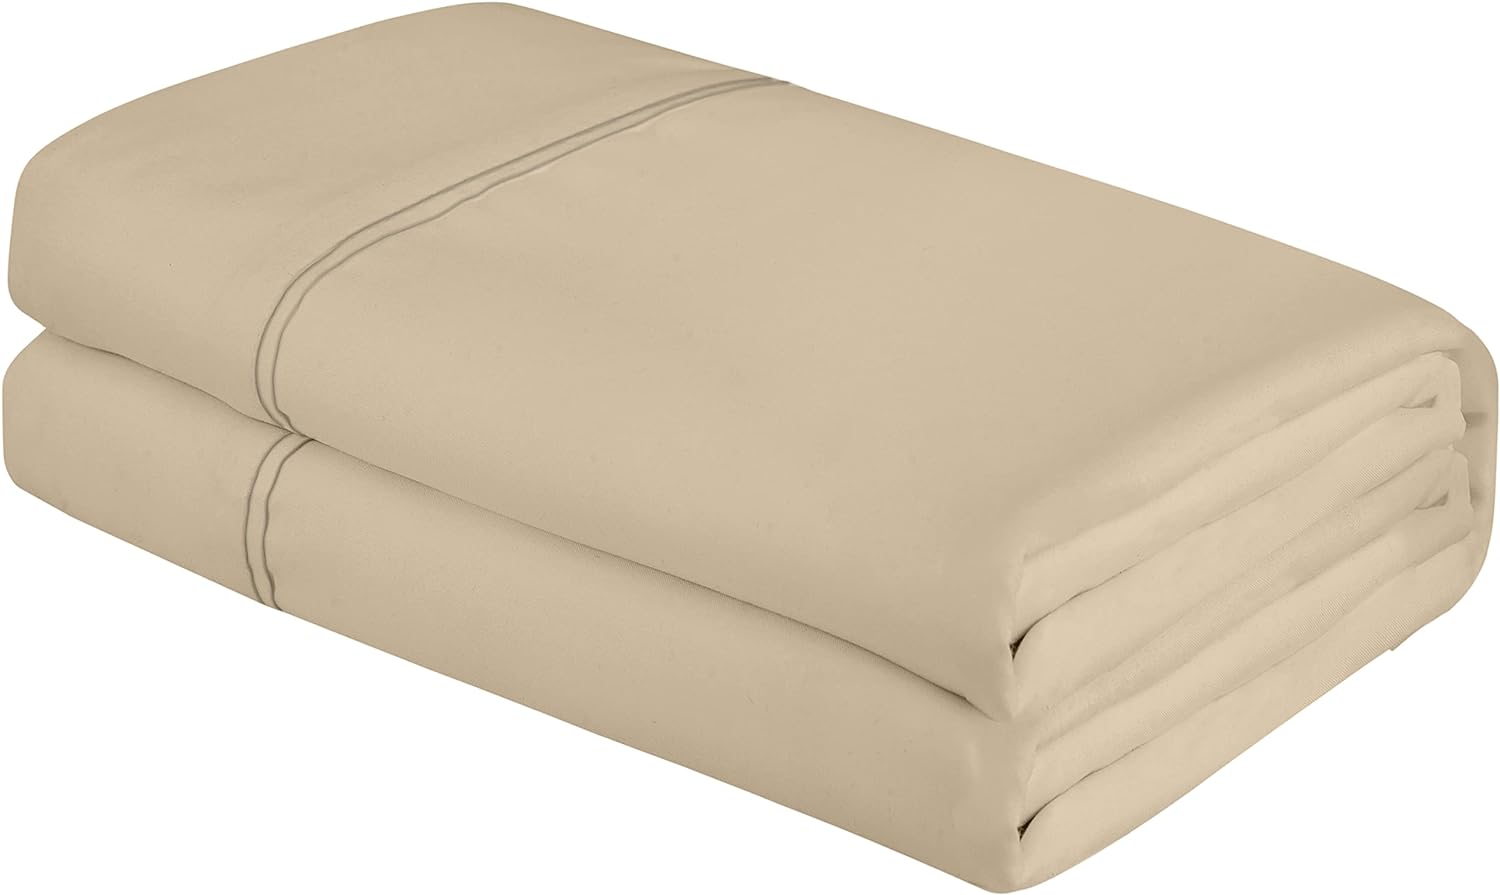 Royale Linens Full Size Flat Sheet Only - Brushed 1800 Microfiber - Ultra Soft & Breathable - Wrinkle & Stain Resistant - Hotel Quality Flat Sheet Sold Separately - Top Sheet for Bed - (Full, Sand)